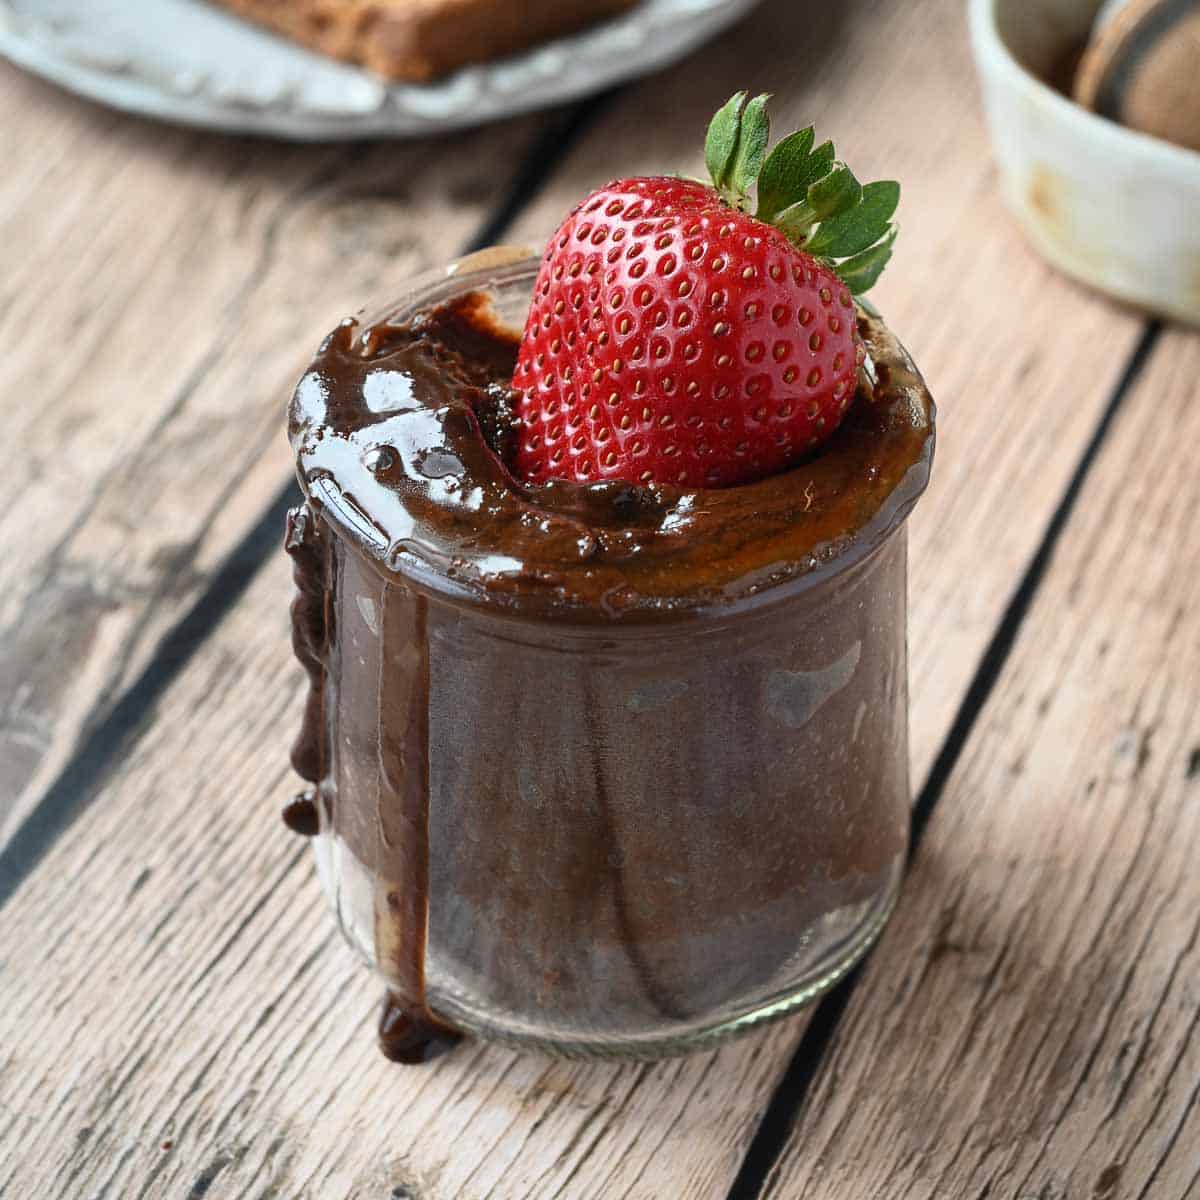 Chocolate tahini spread in a clear jar with a strawberry dipped in.